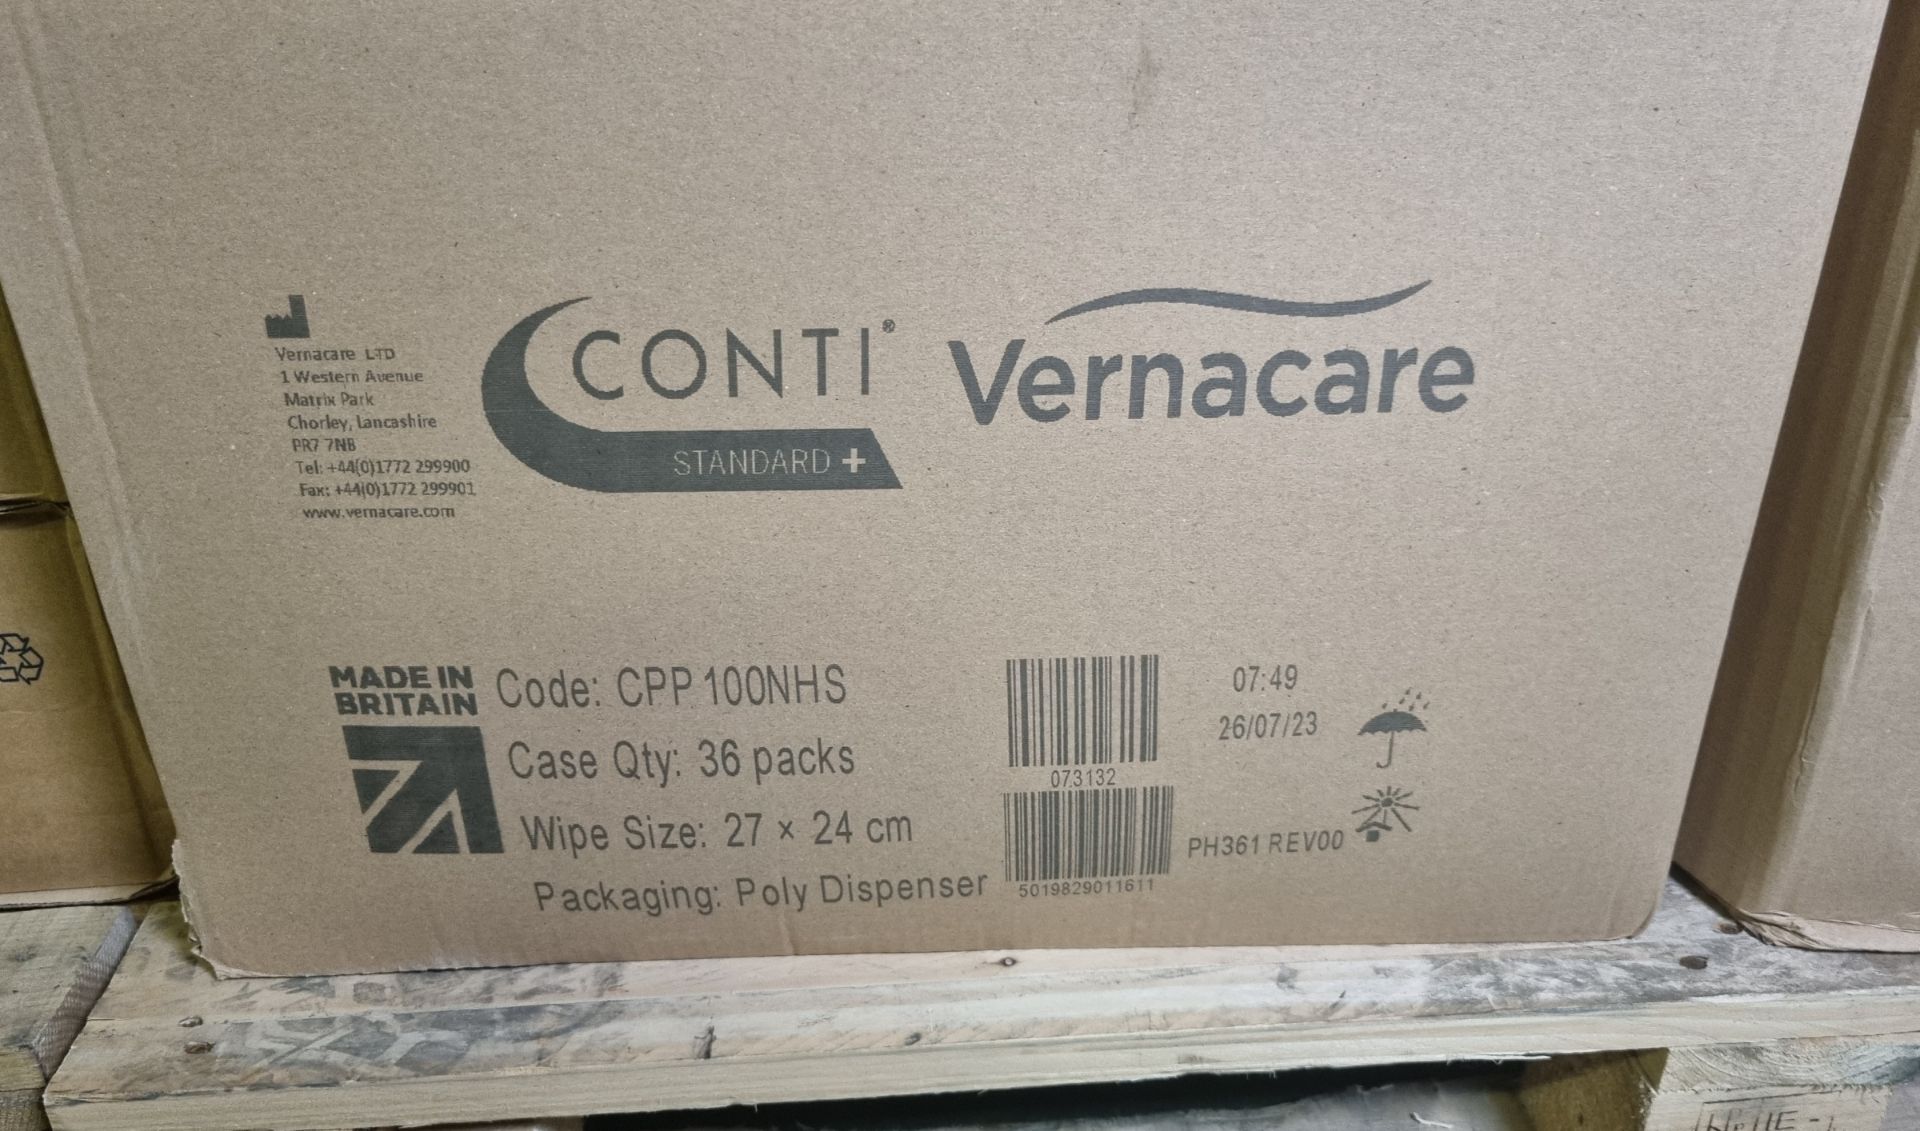 10x boxes of Vernacare Conti Standard+ patient cleansing dry wipes - 36 packs per box - Image 5 of 5